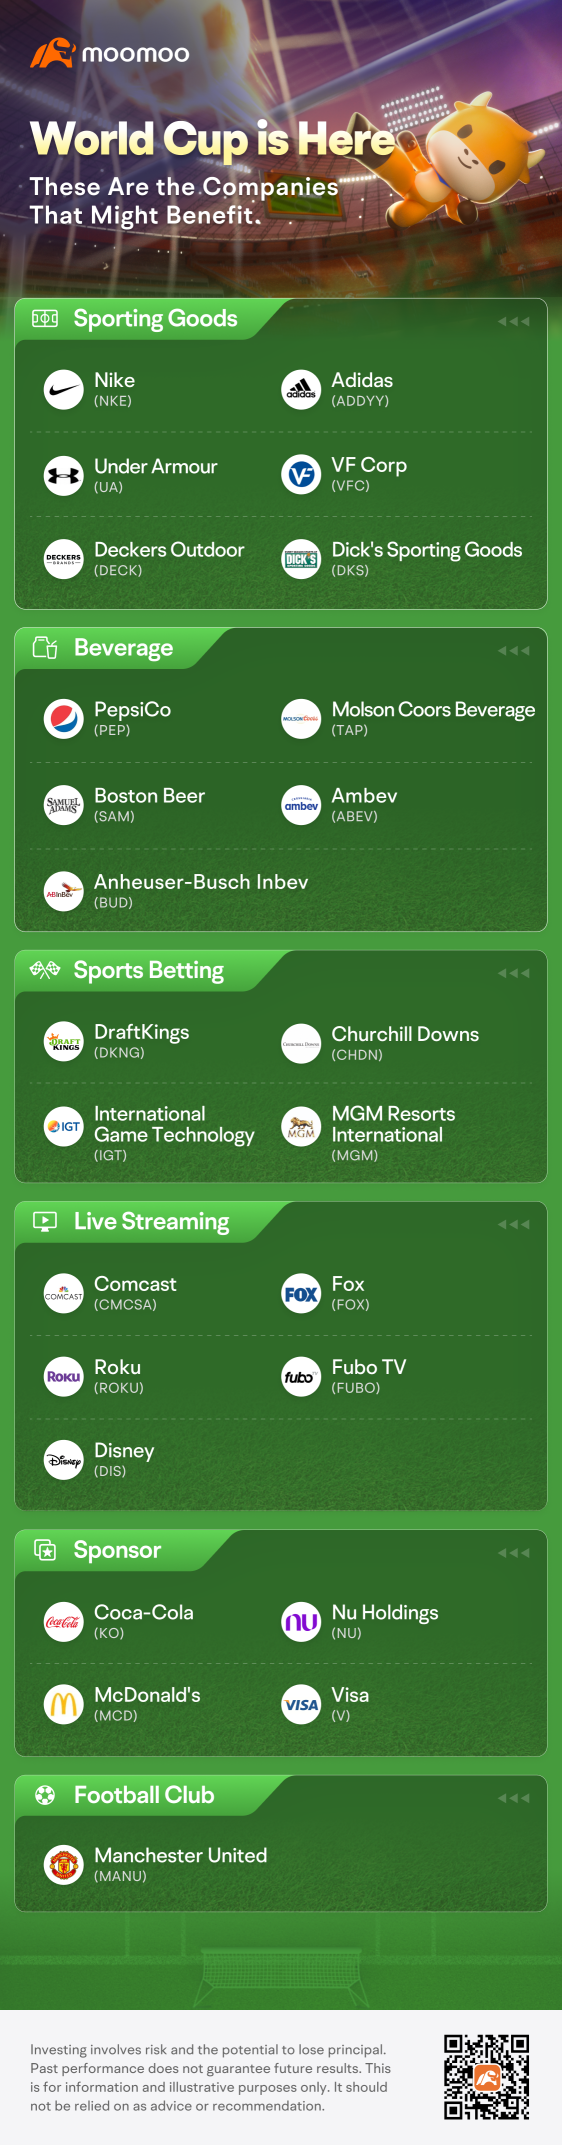 The World Cup is Here! These Are the Companies That Might Benefit